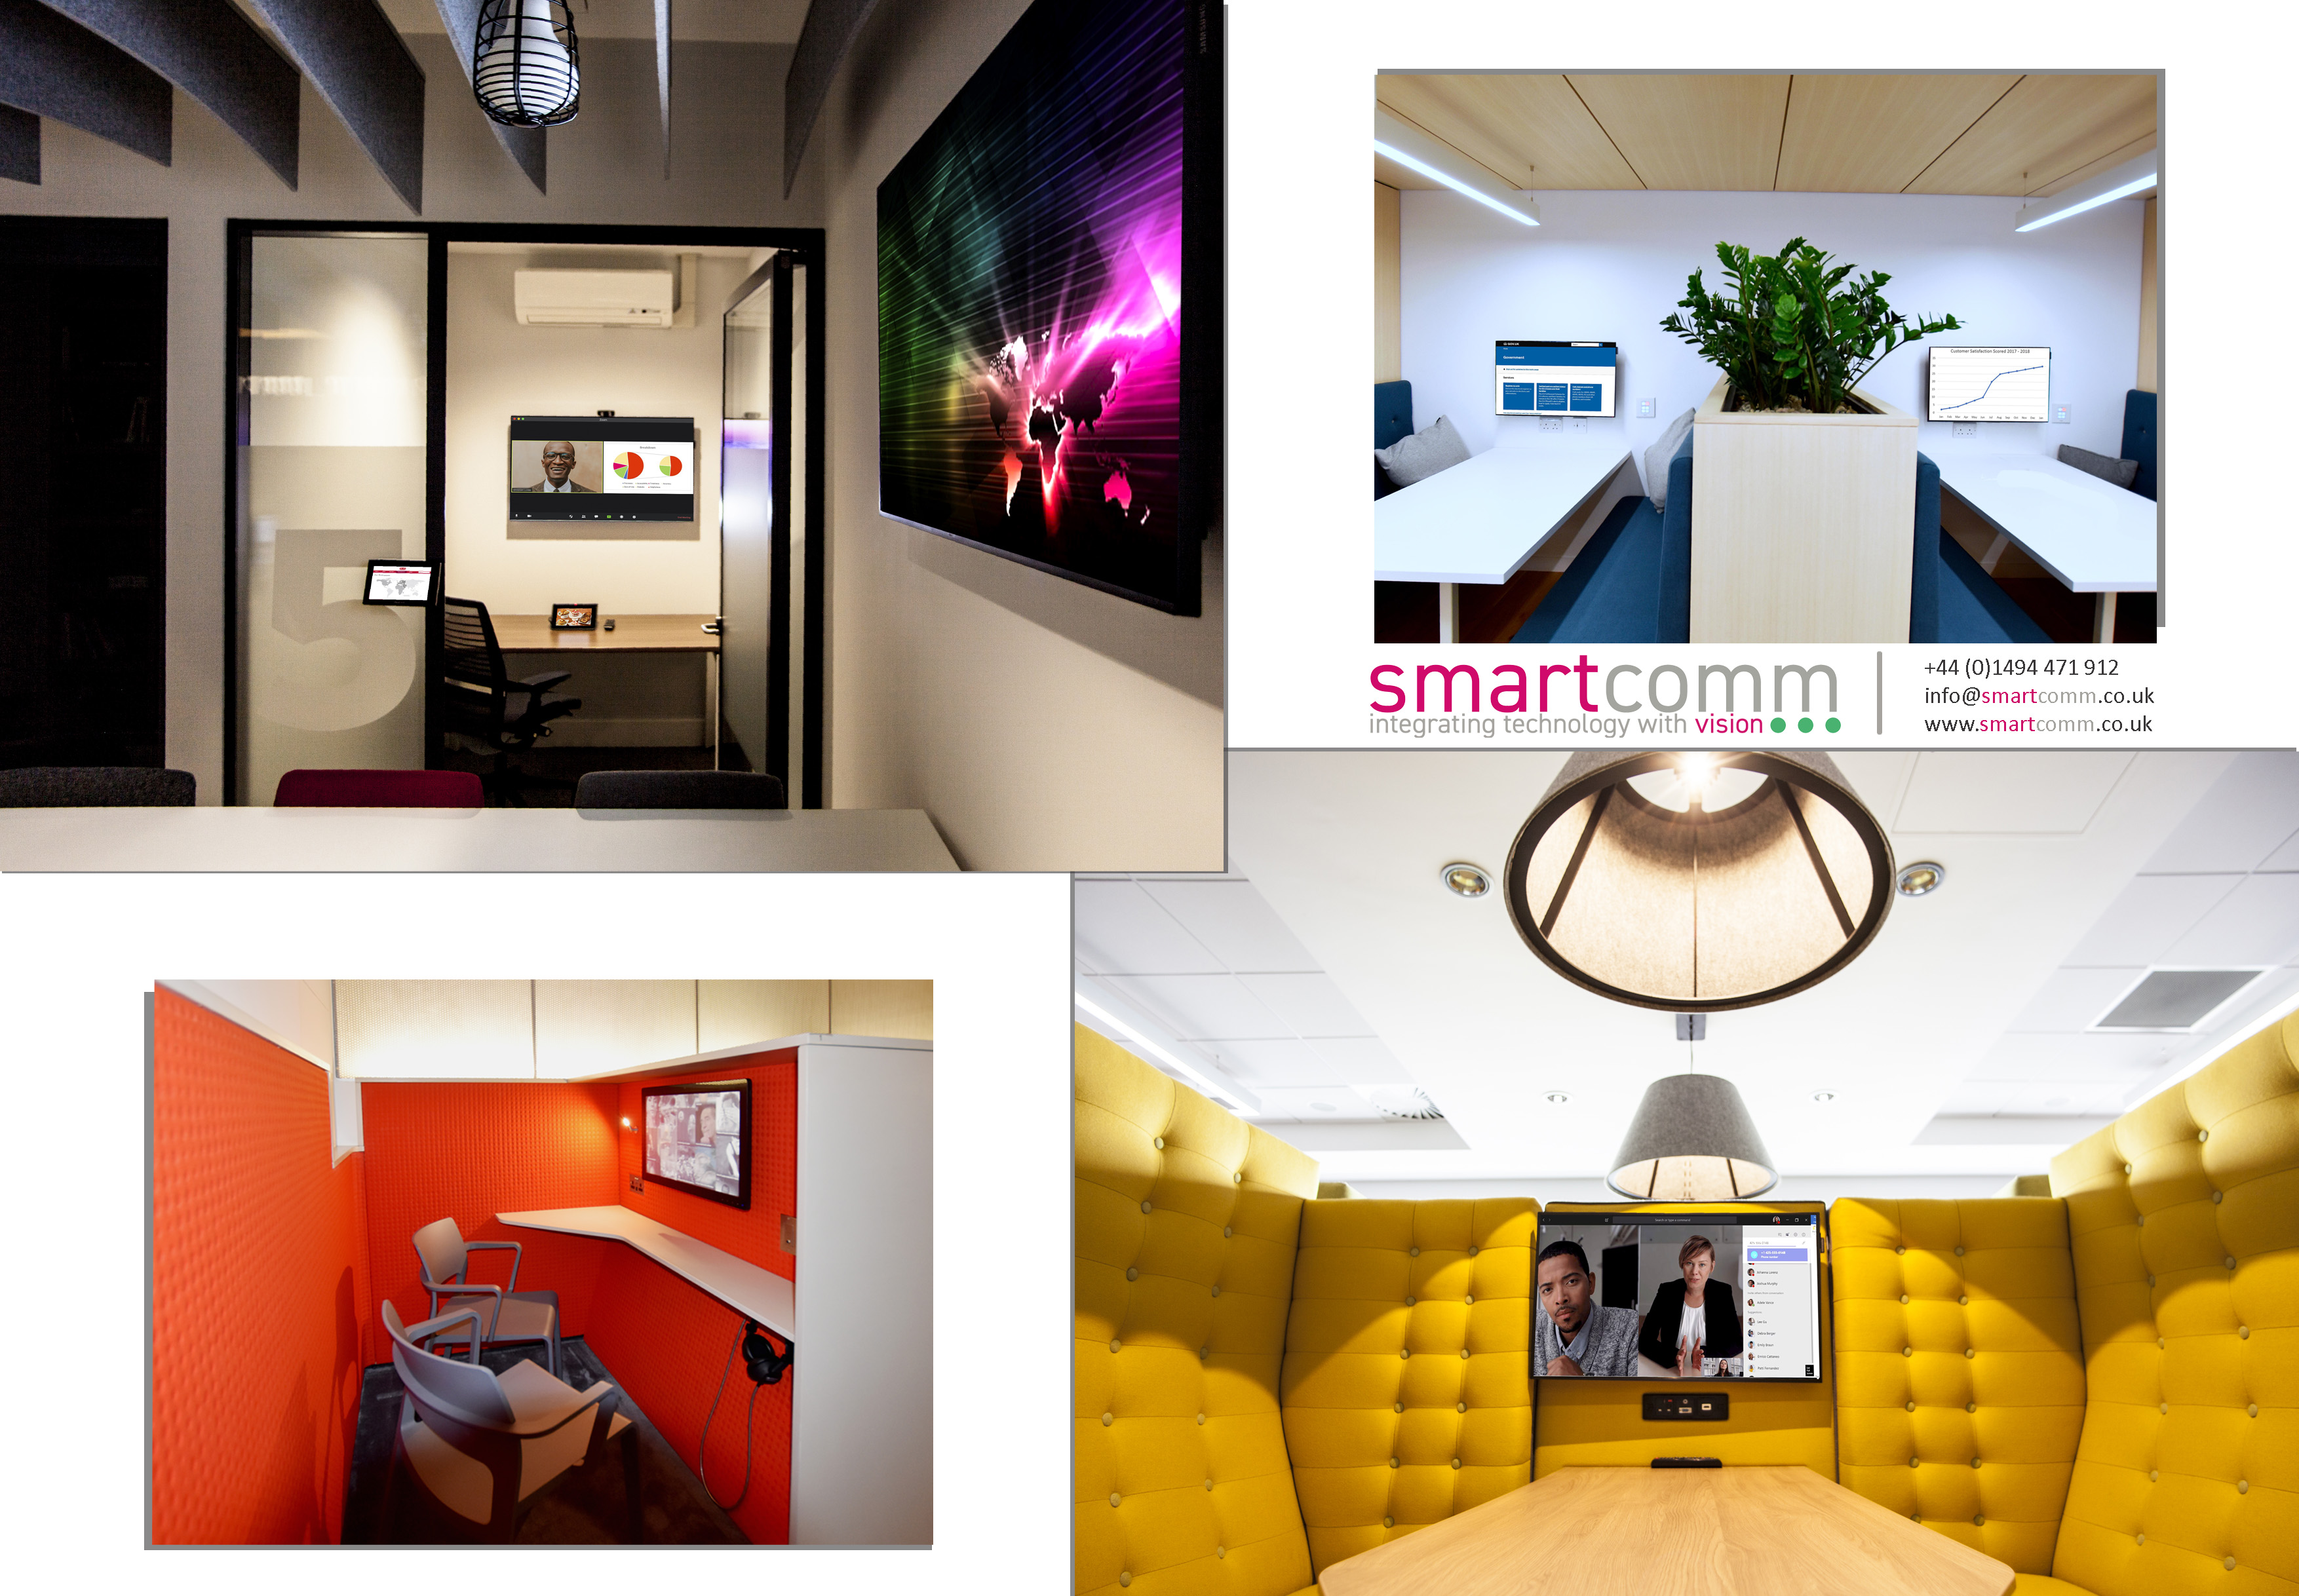 Huddle spaces by Smartcomm